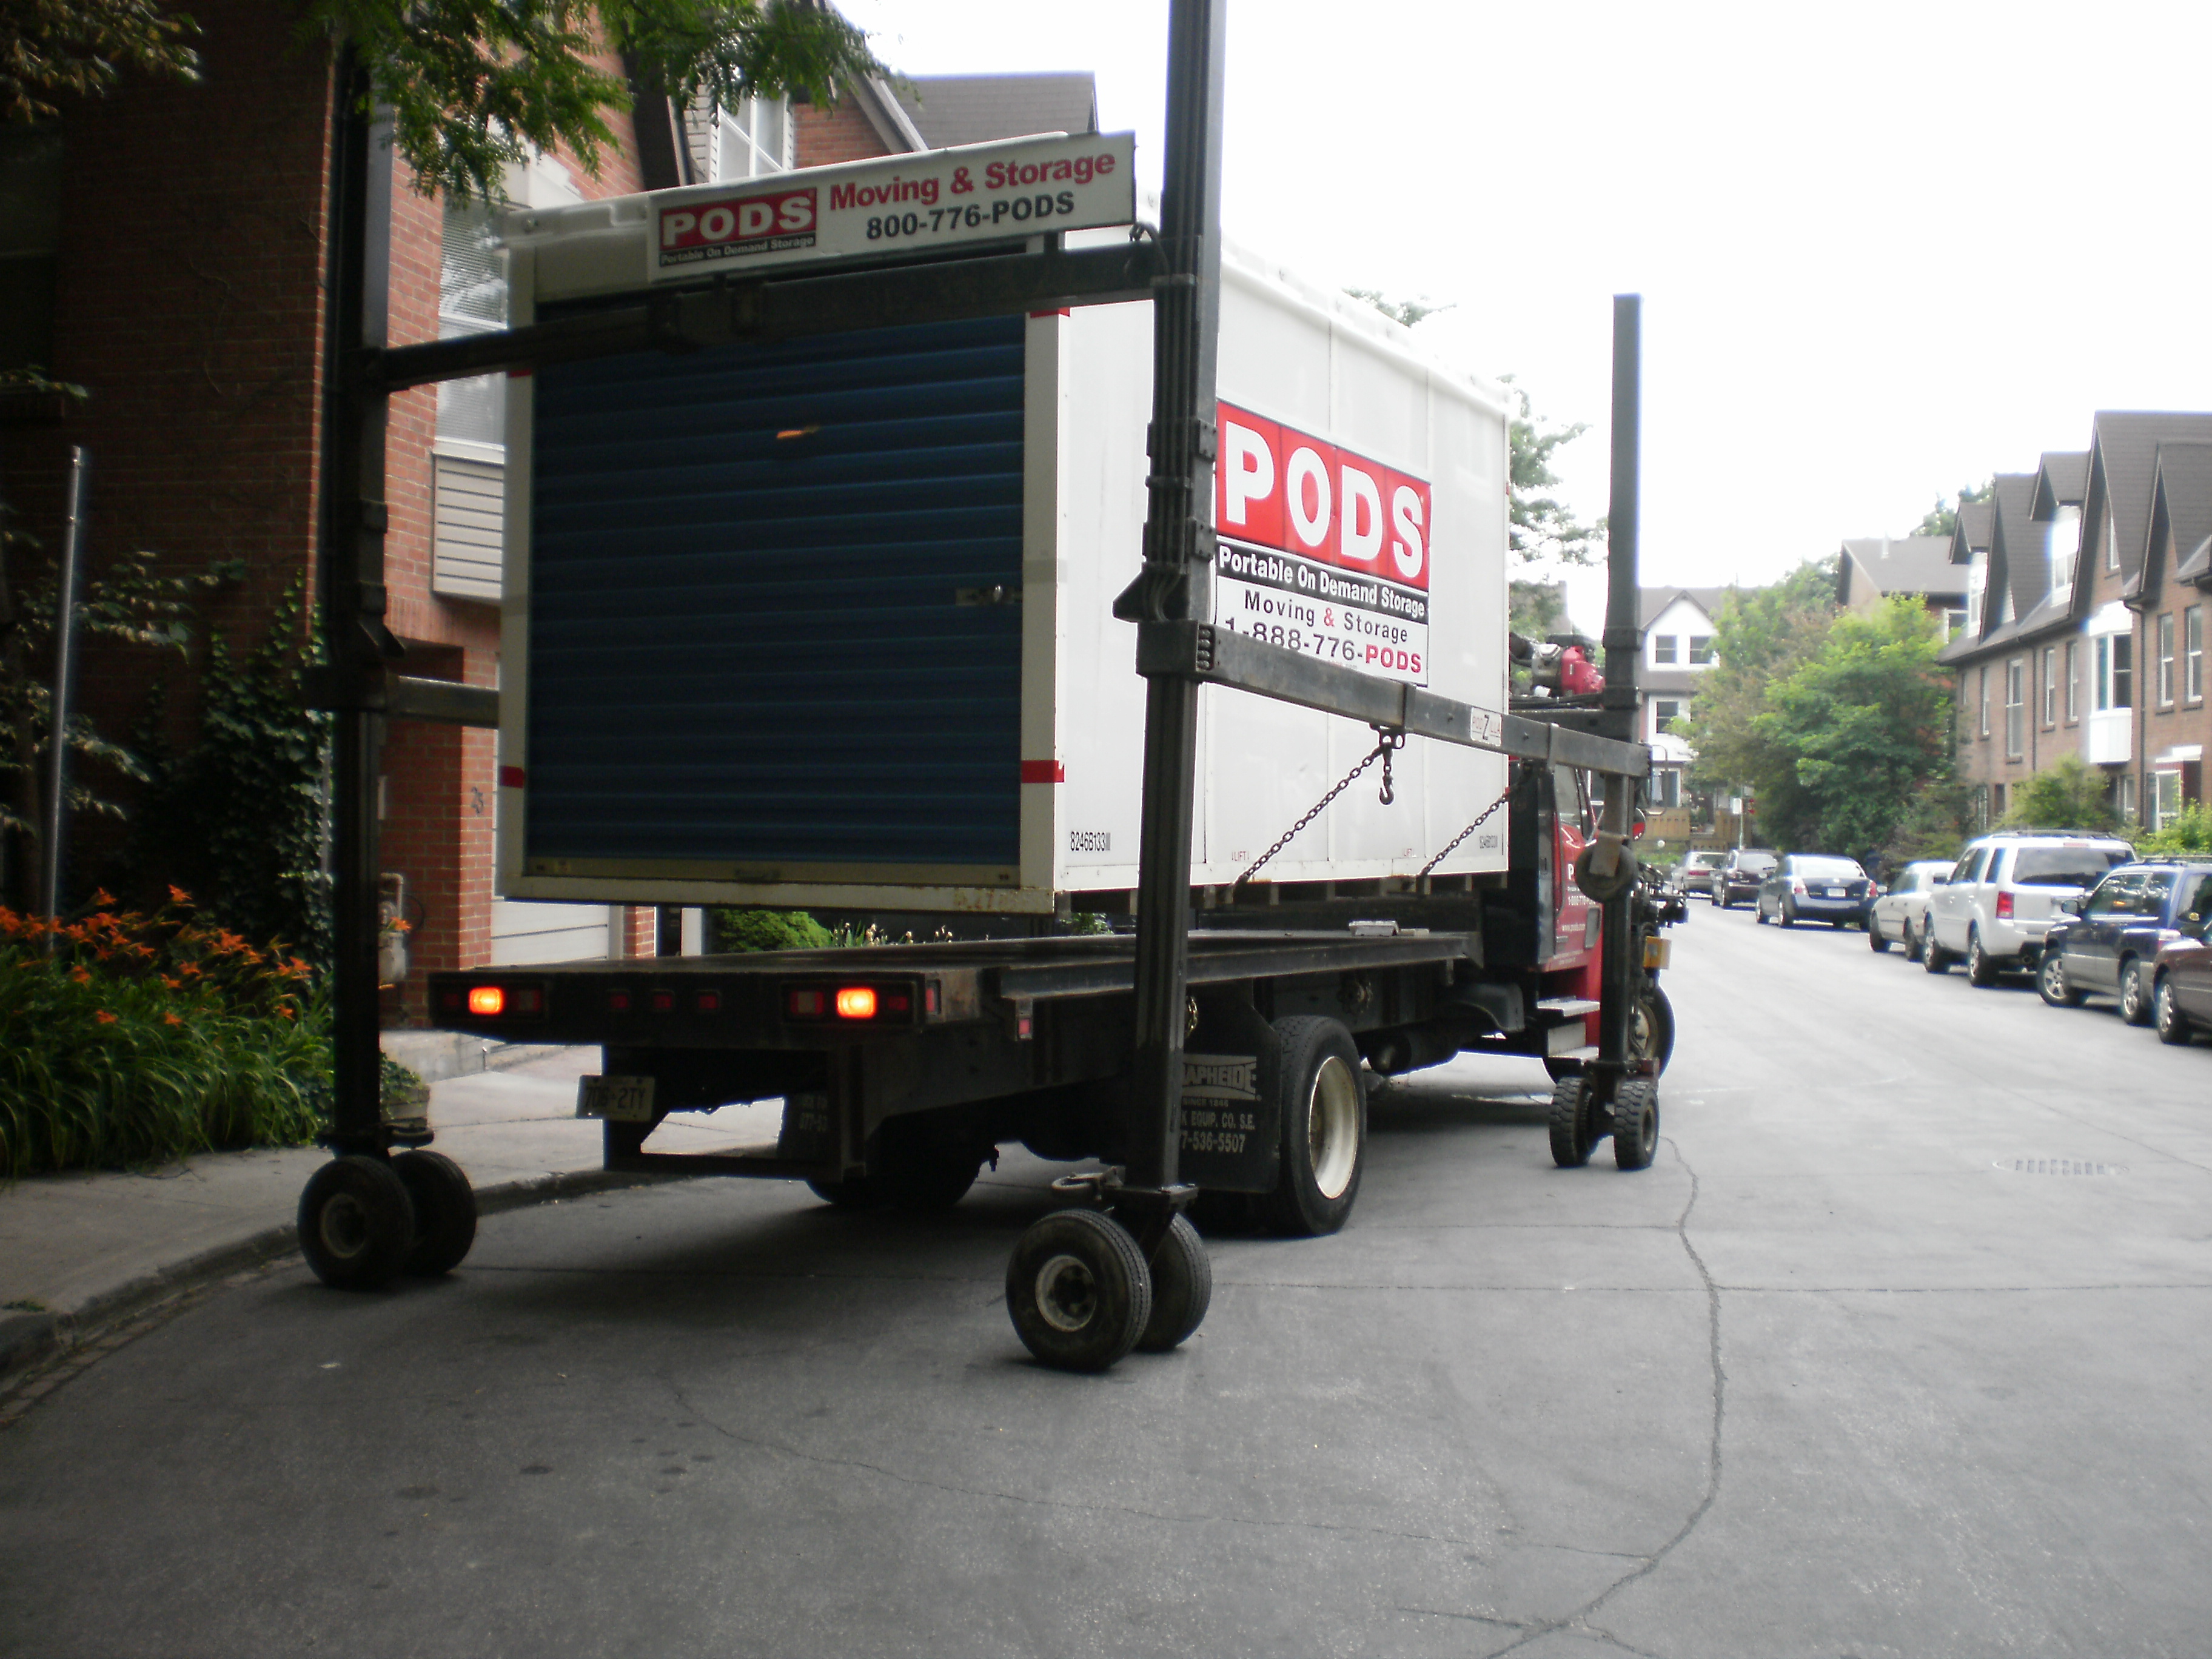 Unloading a shipping container with household contents -f photo